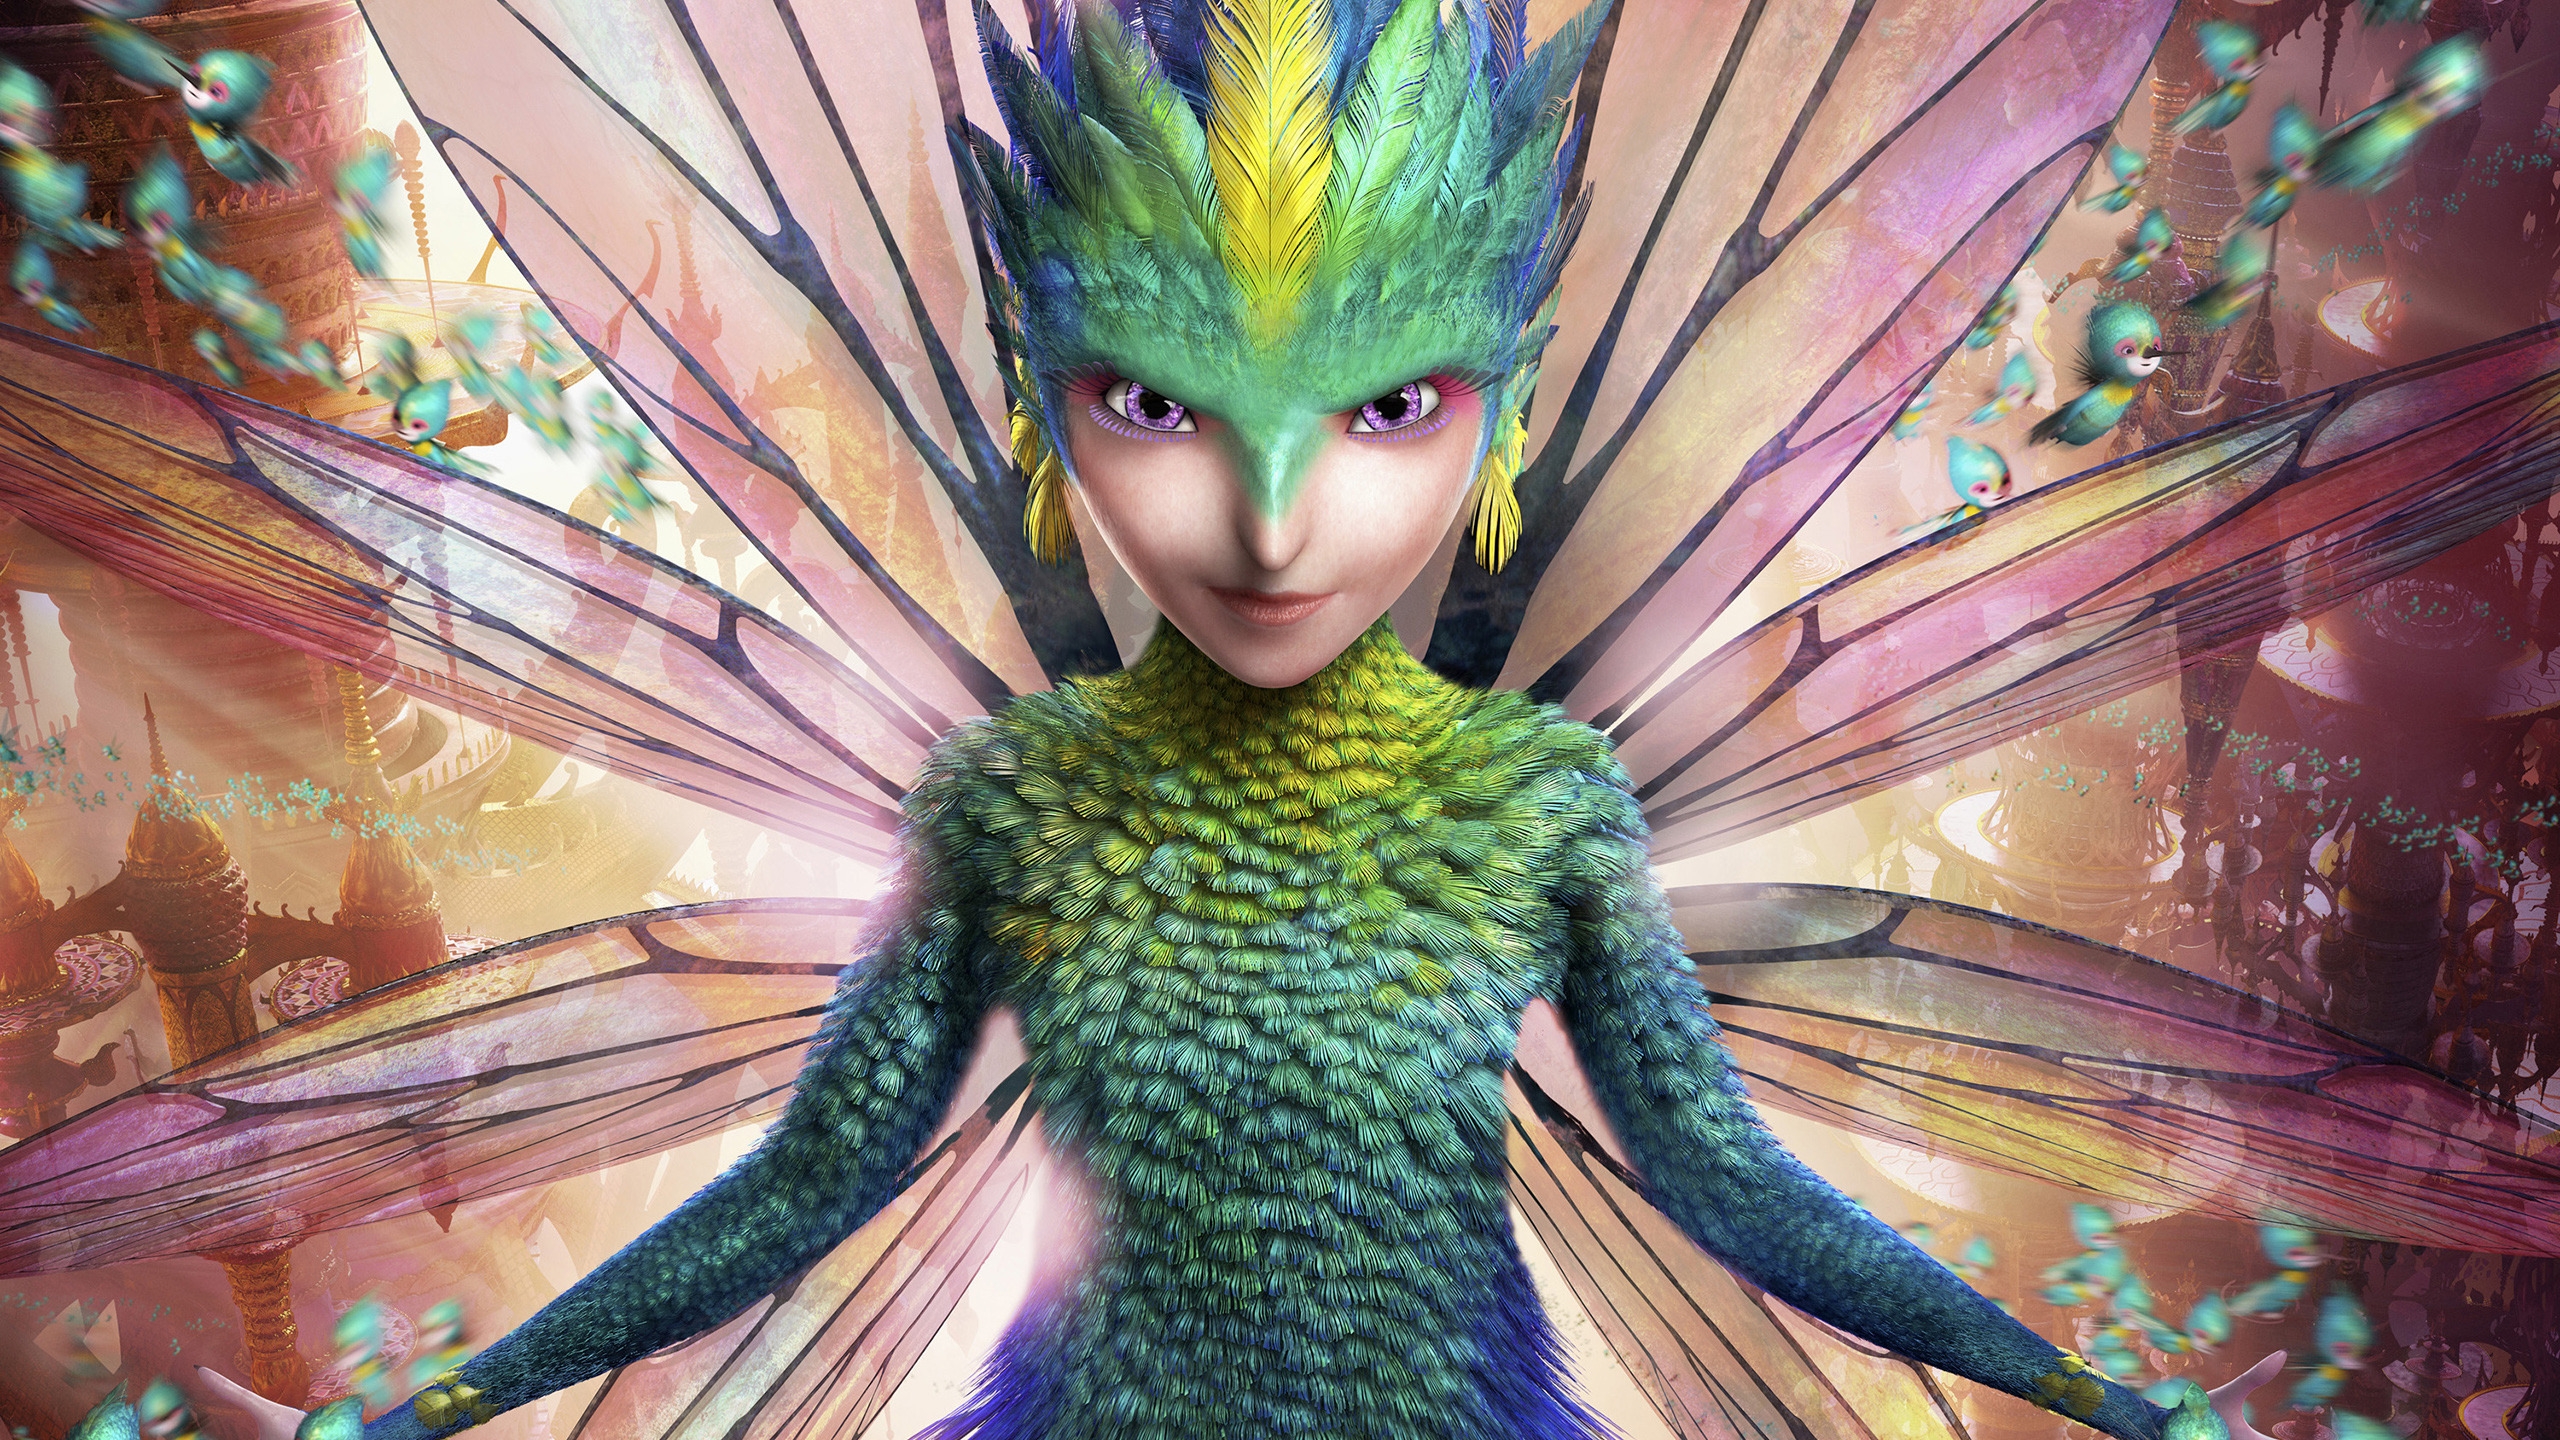 Rise Of The Guardians Tooth Fairy for 2560x1440 HDTV resolution